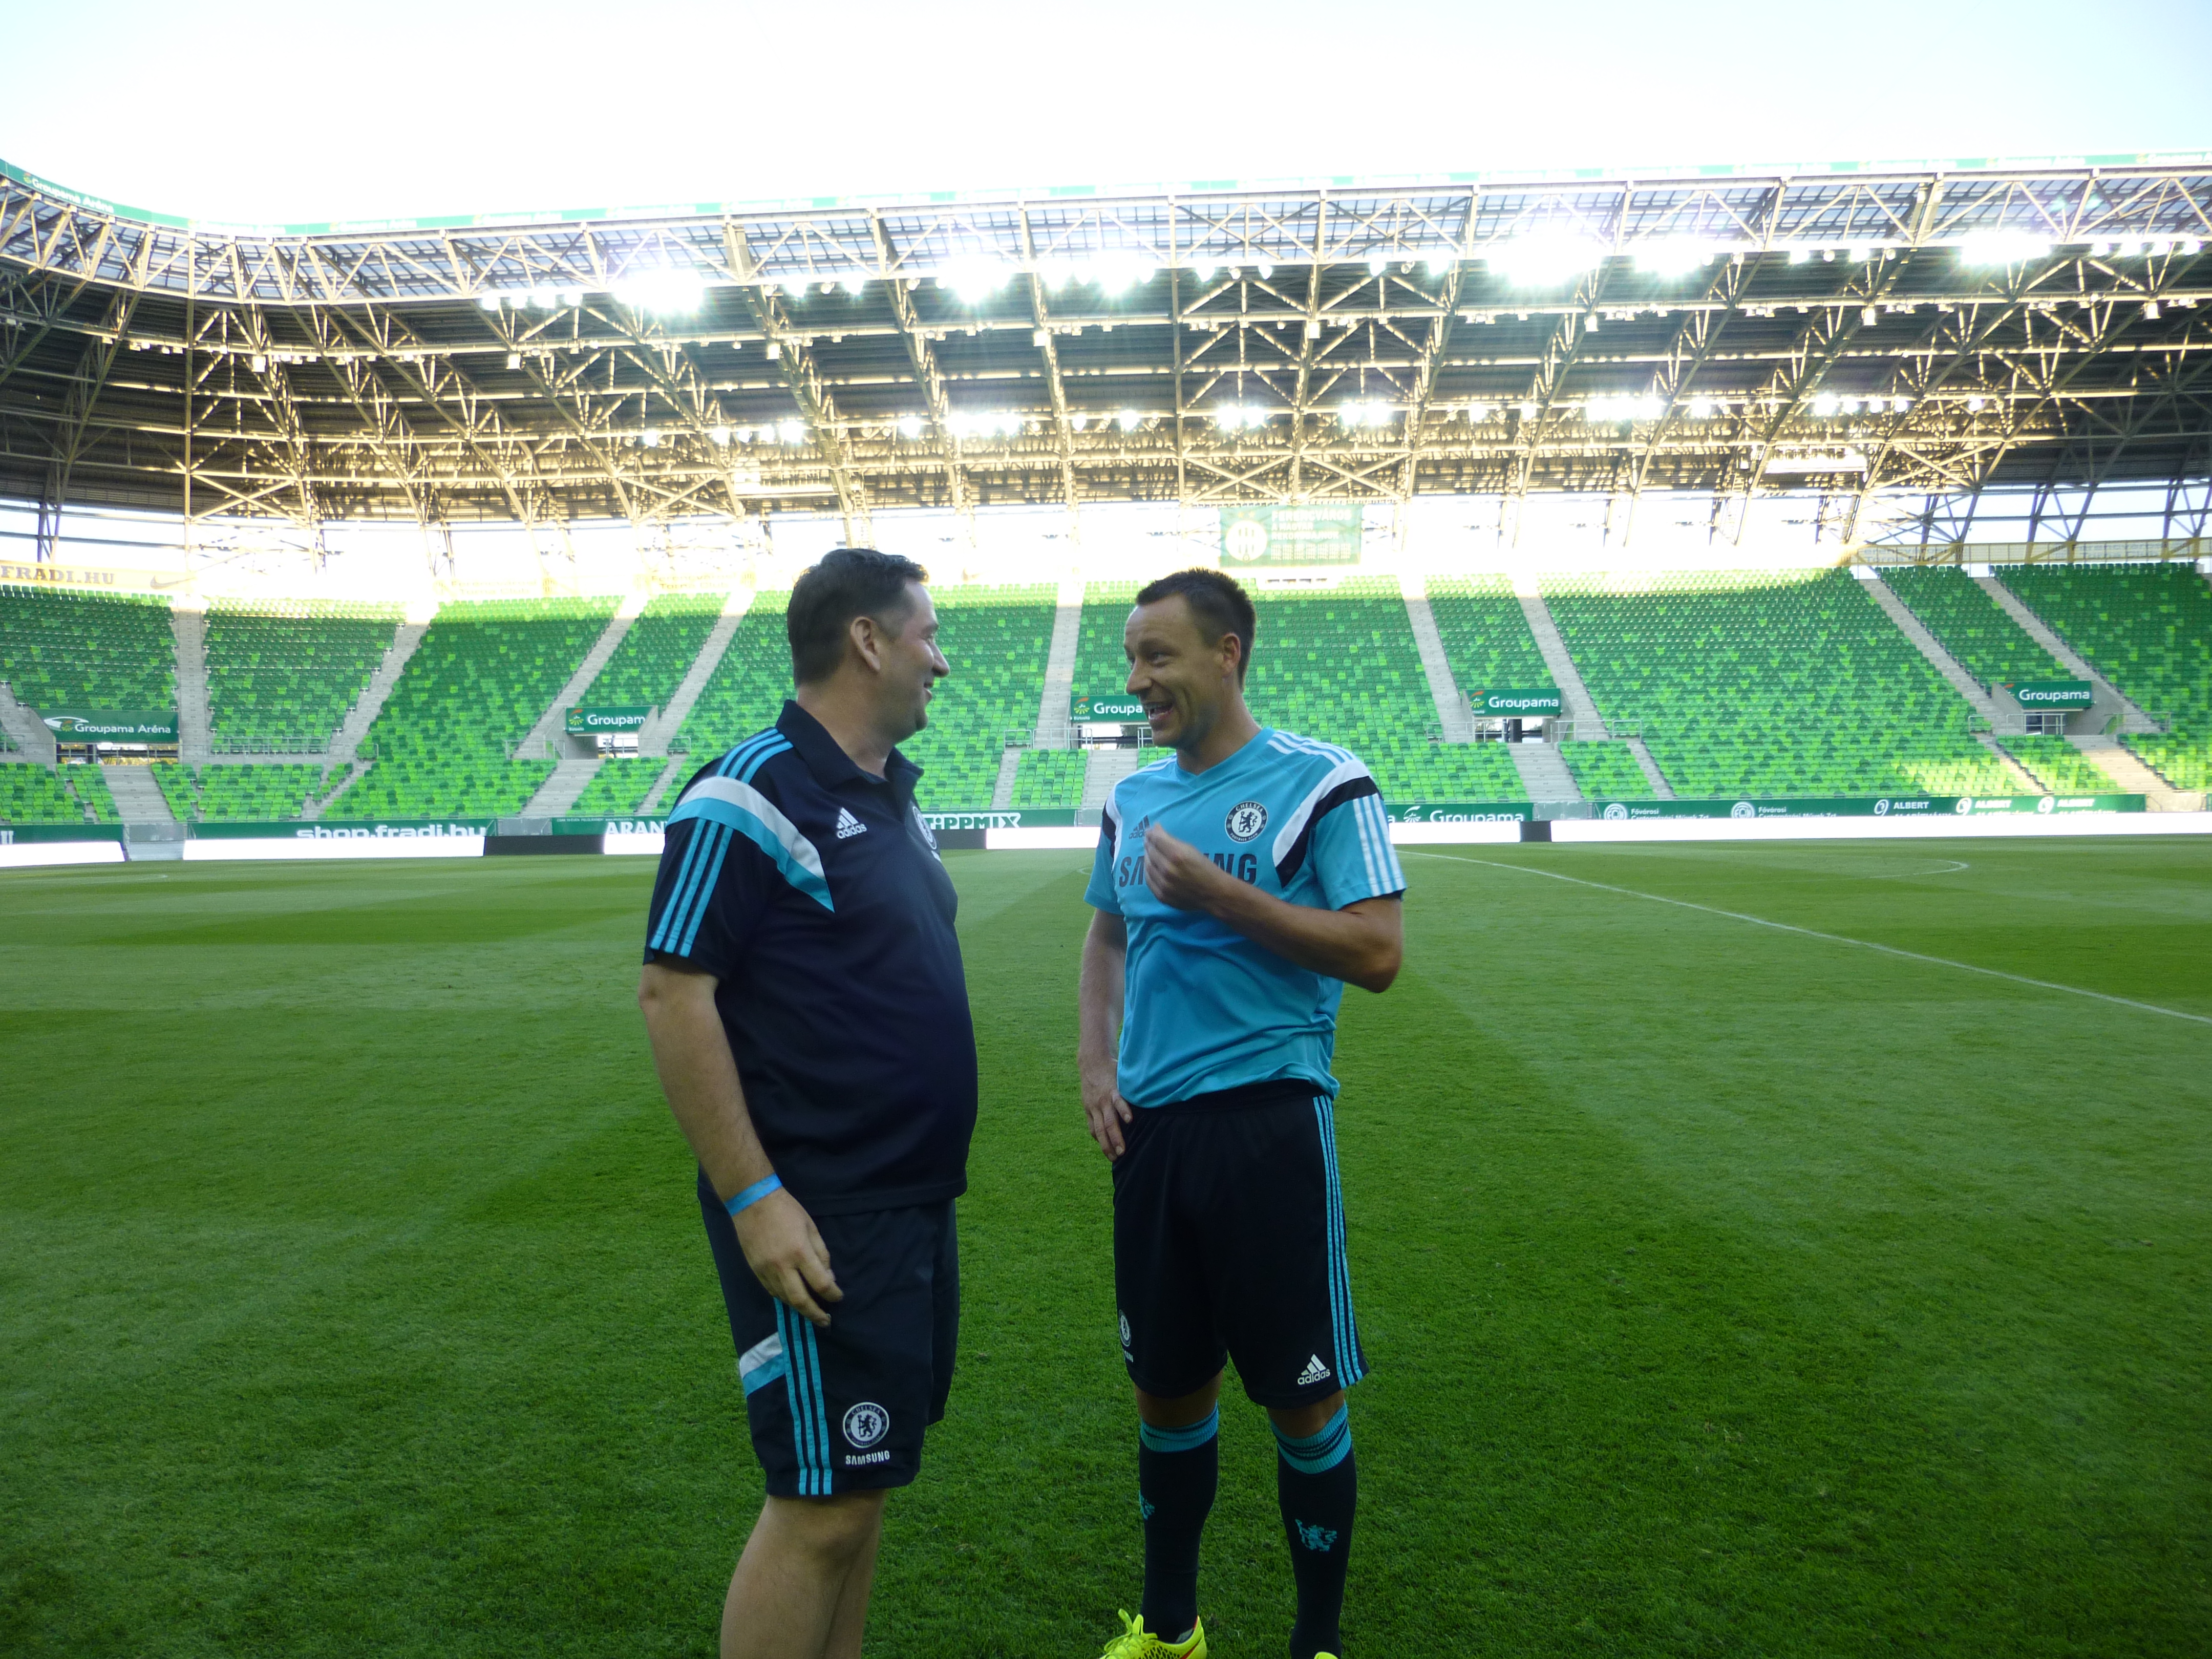 Philip Waley and John Terry of Chelsea Football Club- Budapest 2014